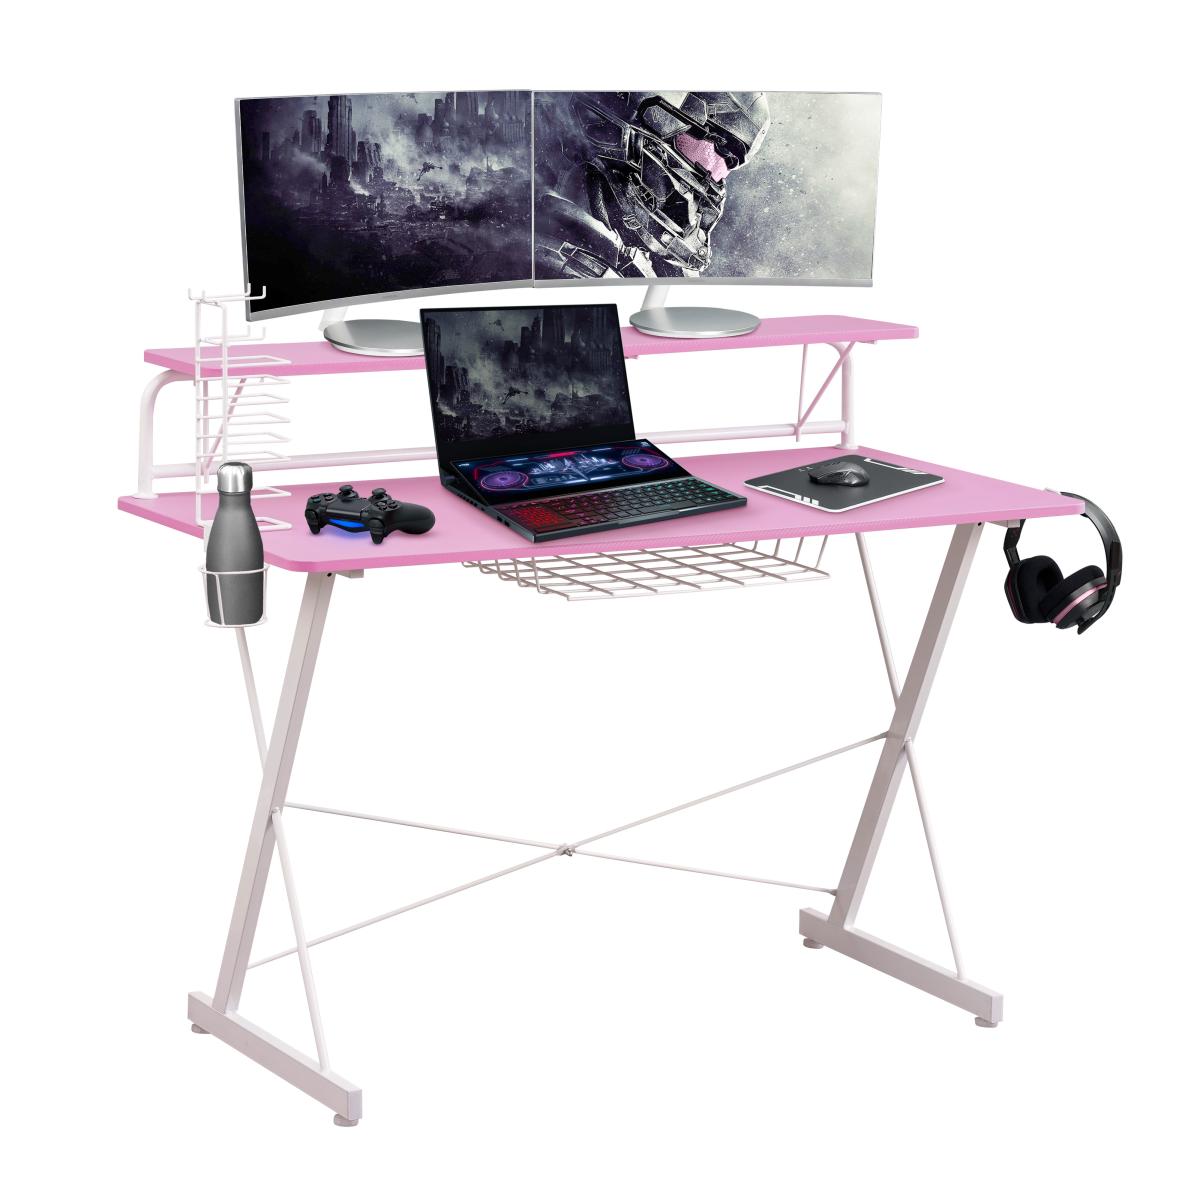 Techni Sport Ts-200 Carbon Computer Gaming Desk with Shelving, Pink